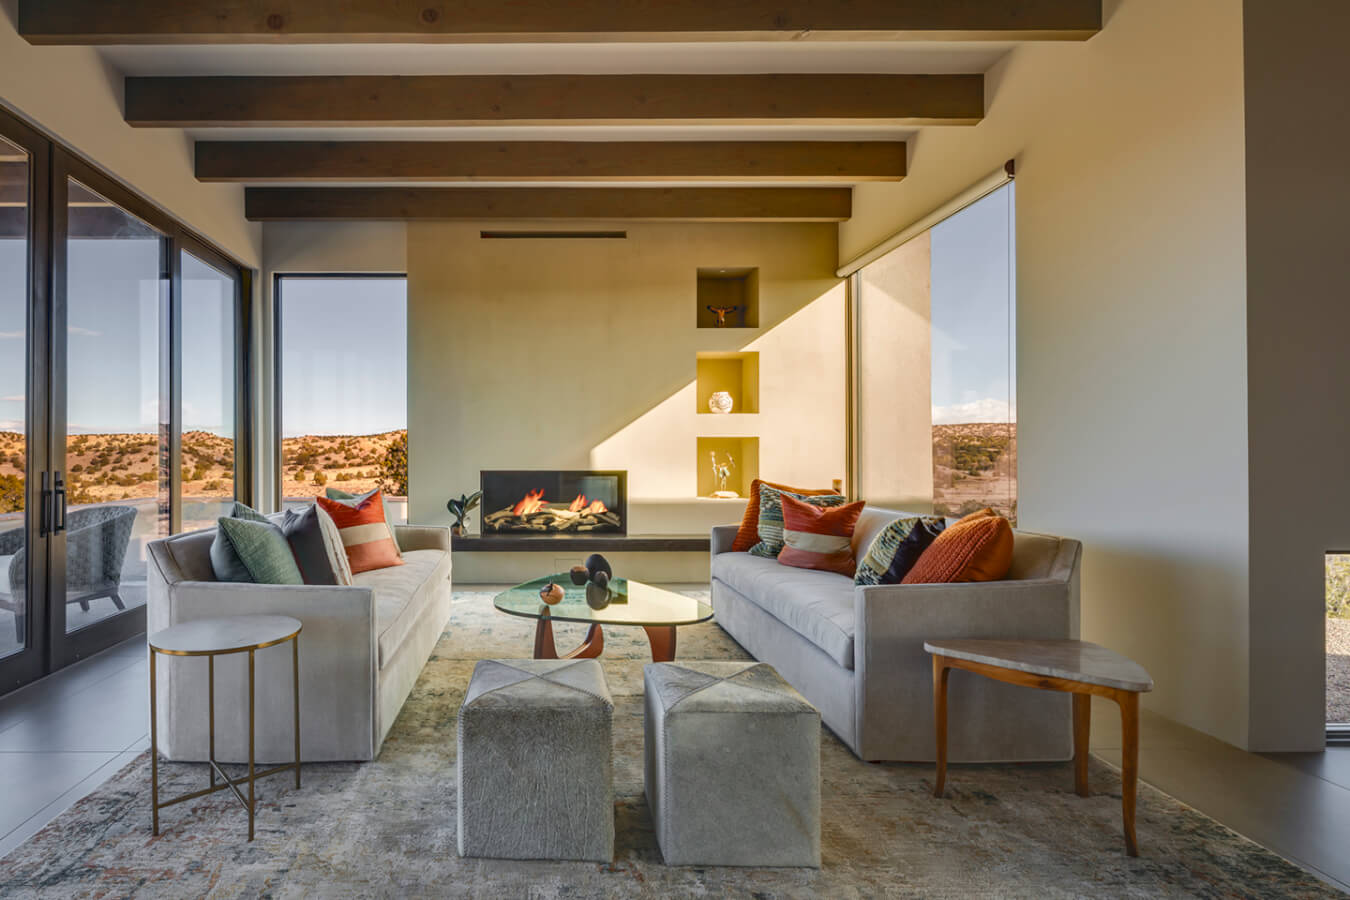 A Santa Fe style living room designed by an architect with a fireplace and a view of the desert.